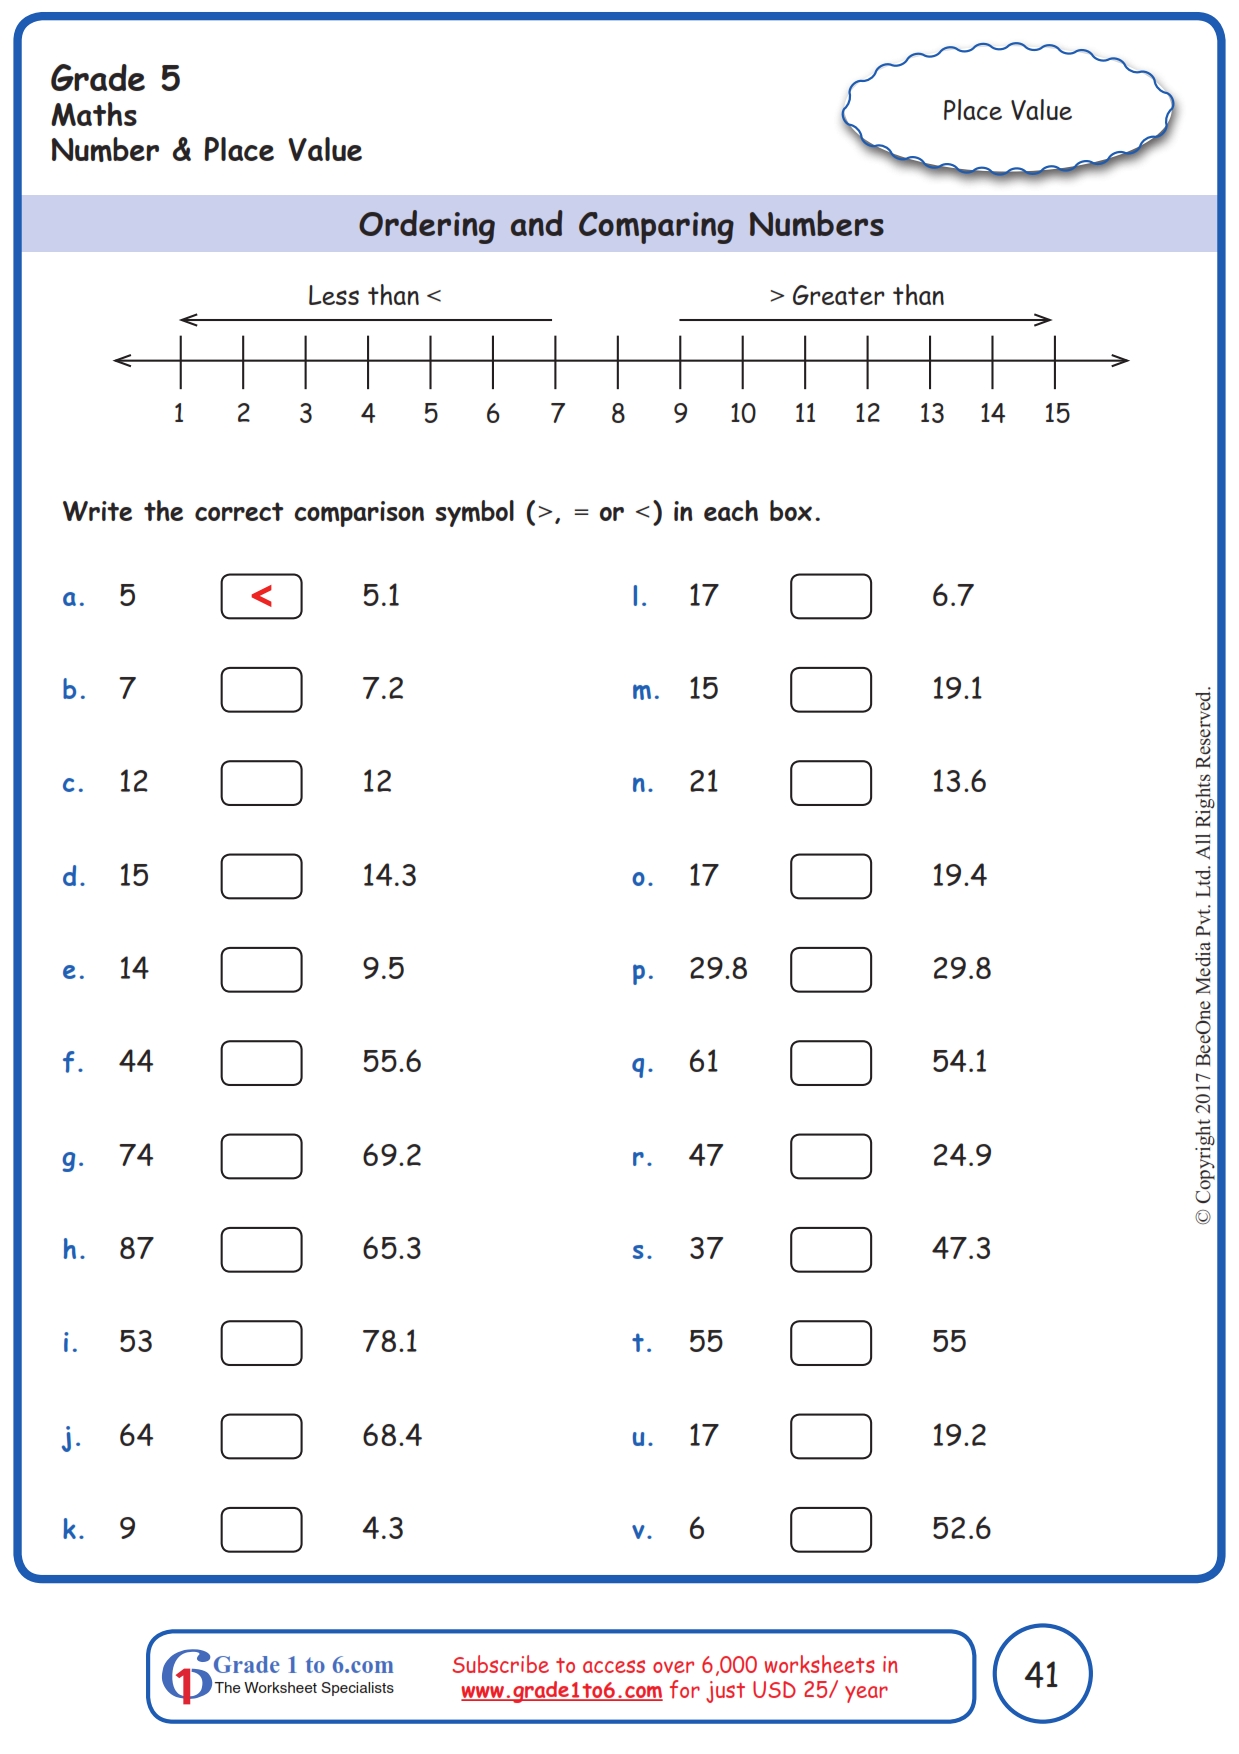 ordering-comparing-decimals-worksheets-www-grade1to6